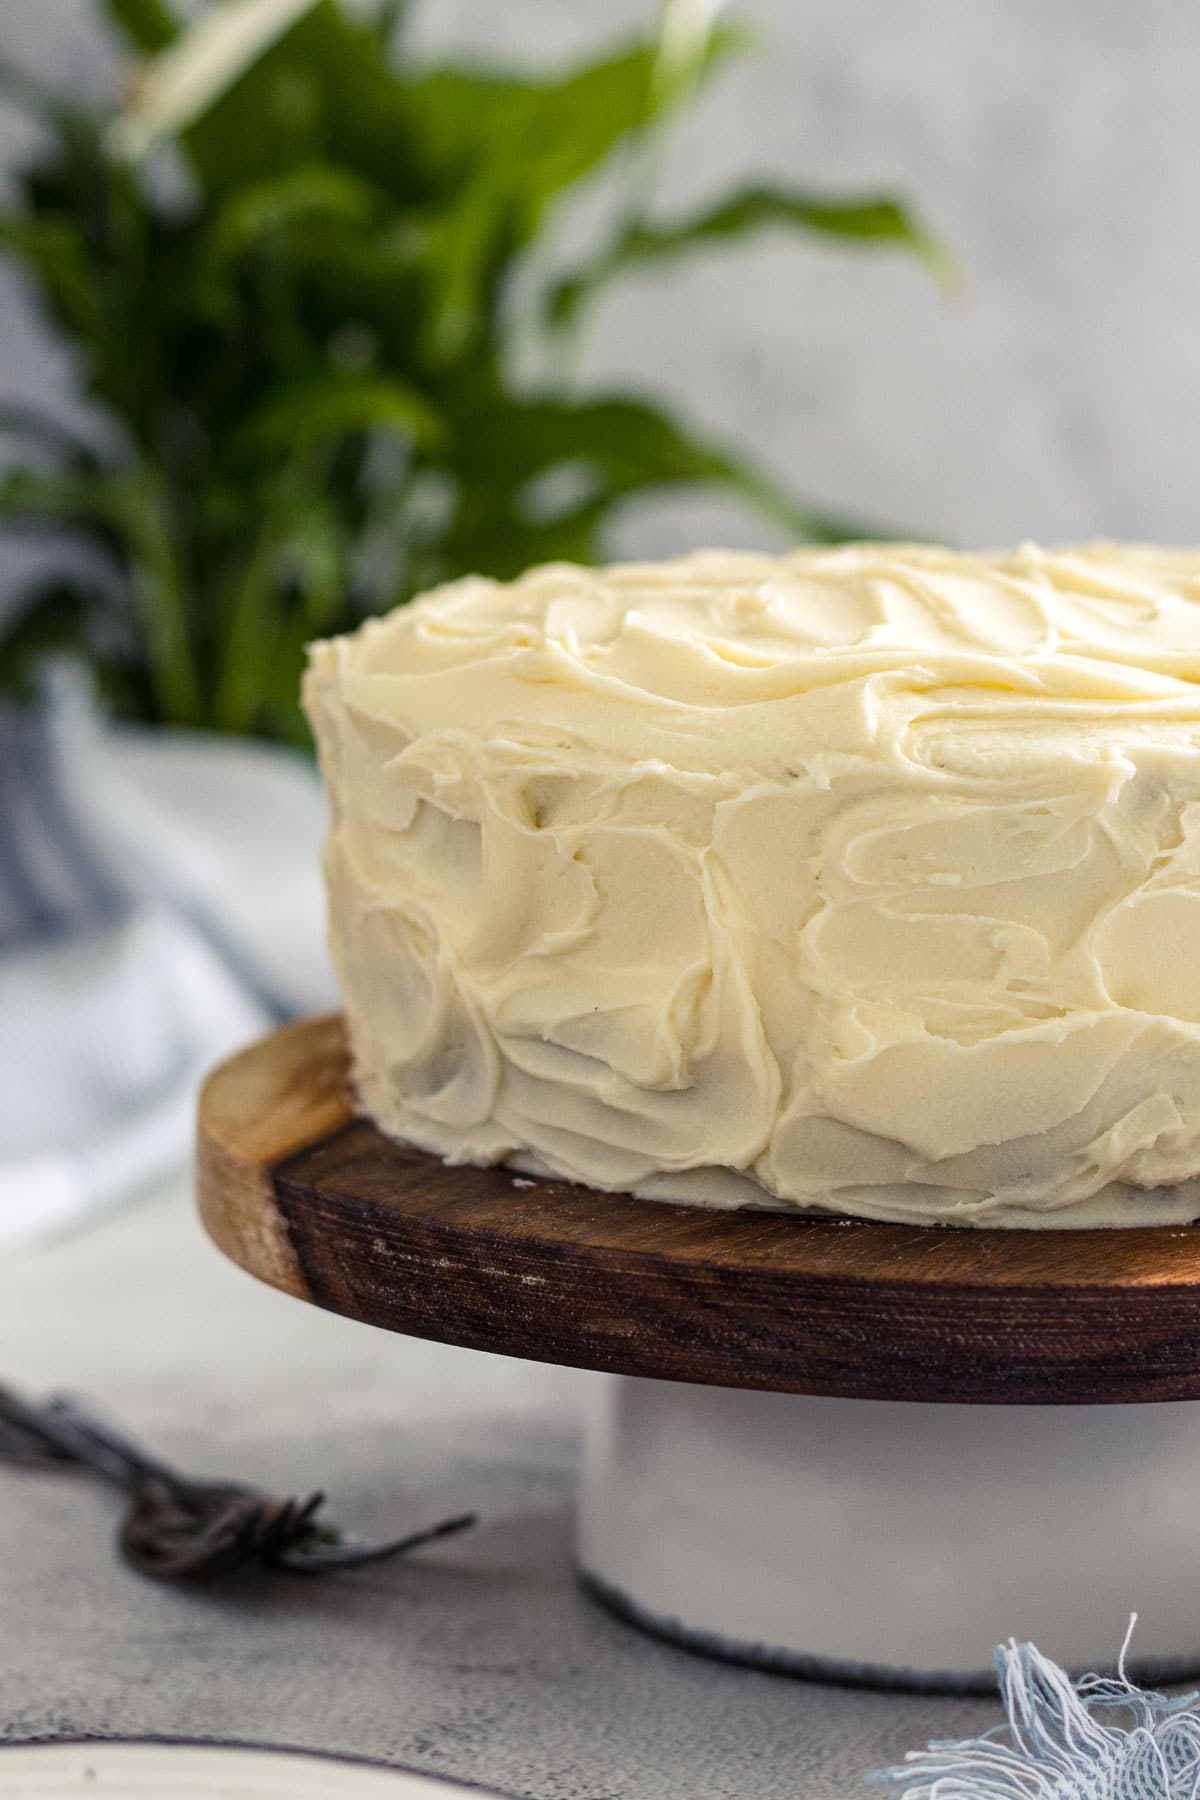 Carrot cake with rustic cream cheese icing/frosting.